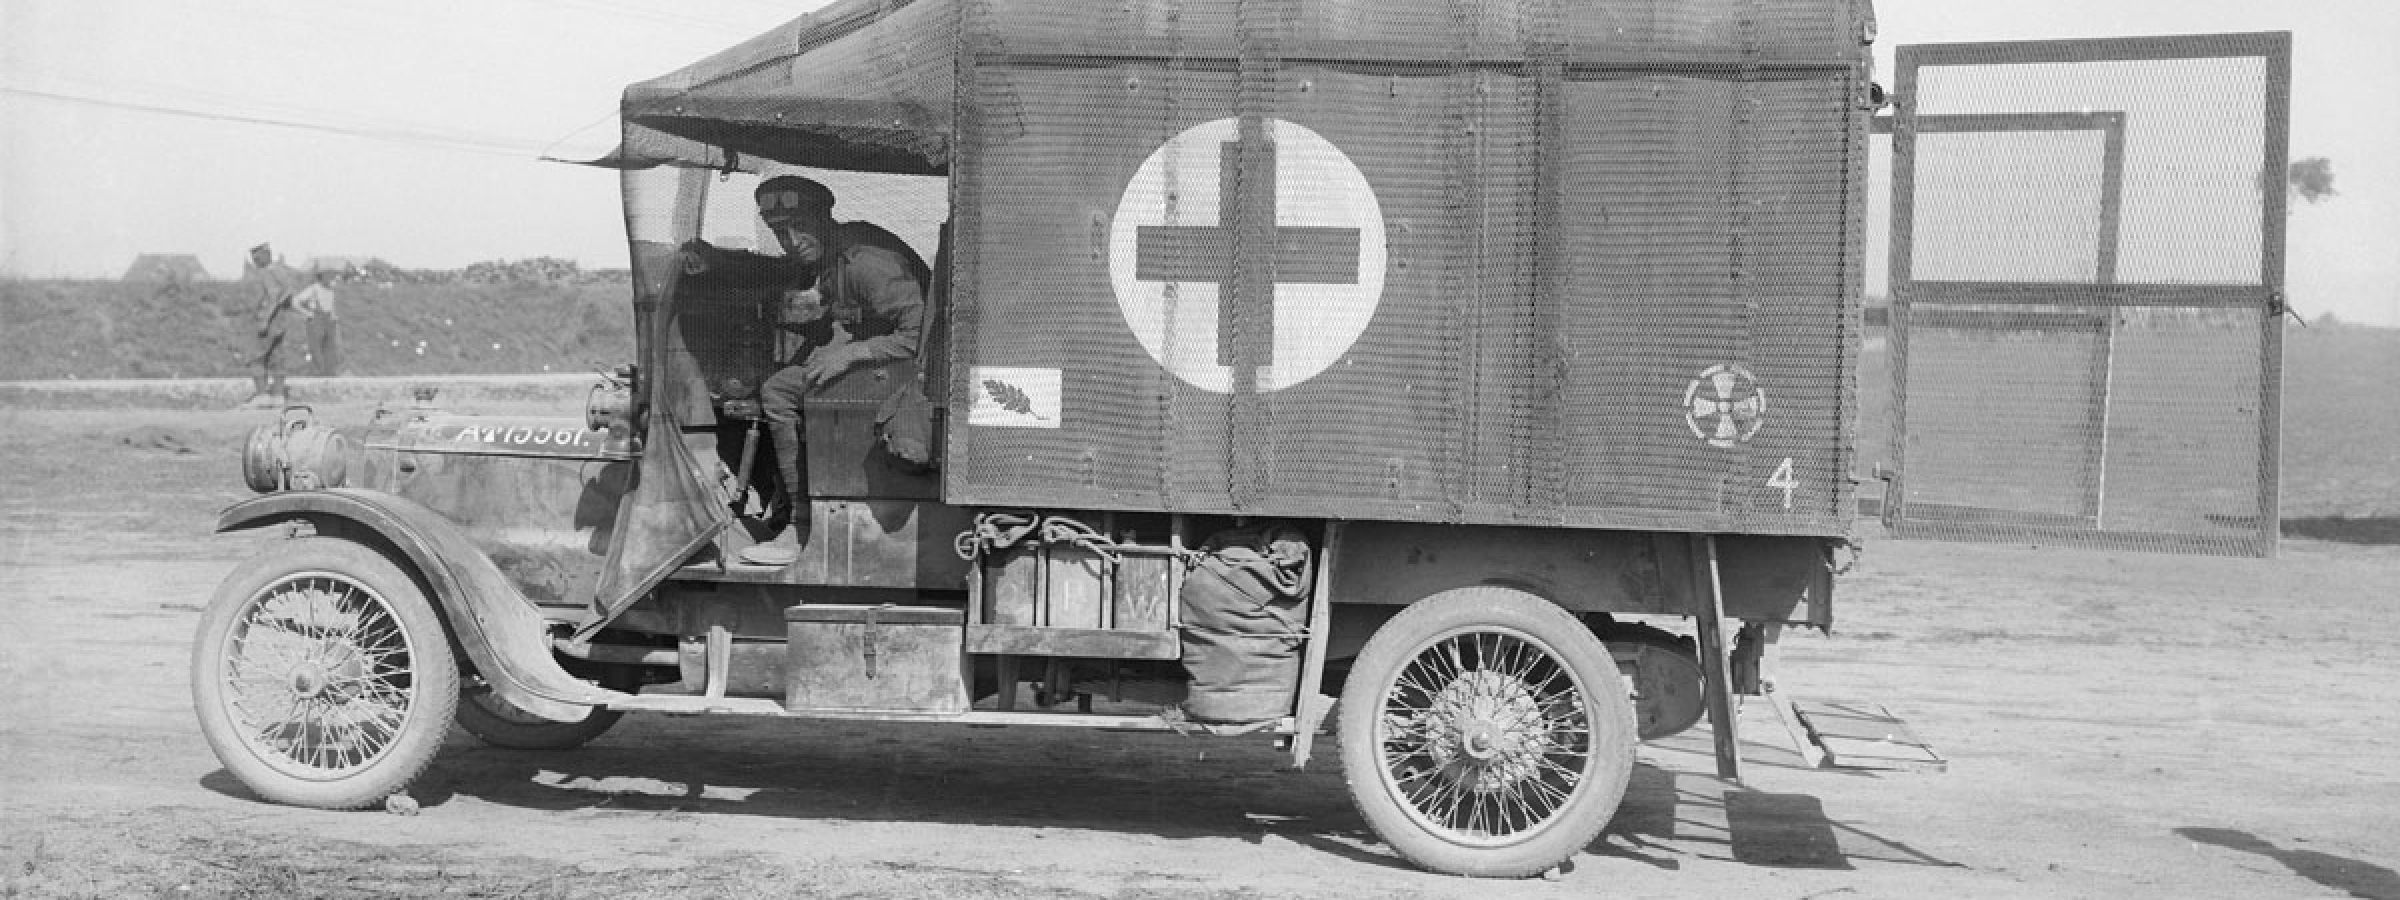 A New Zealand Division ambulance with shrapnel-proofing at a casualty clearing station near Albert. September 1916.